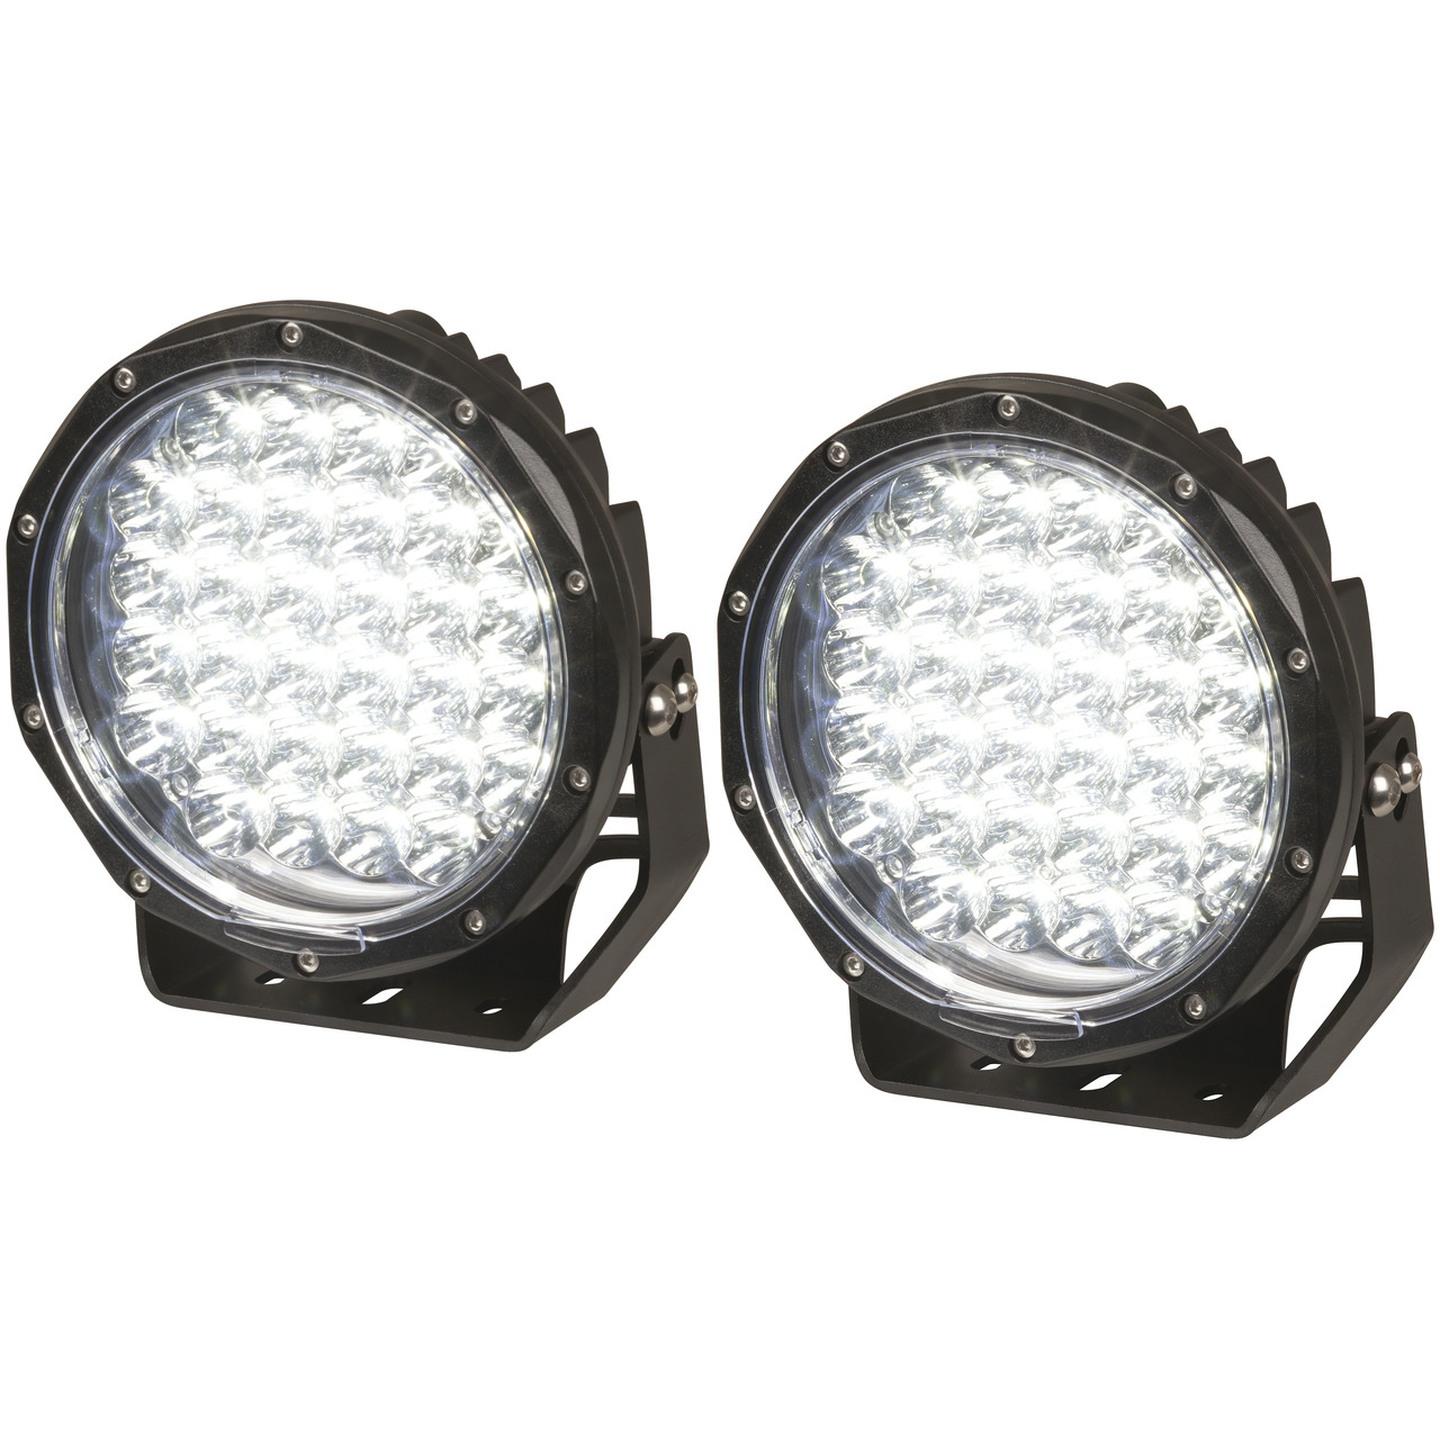 7900 Lumen 9 Inch Solid LED Driving Light Sold as Pair